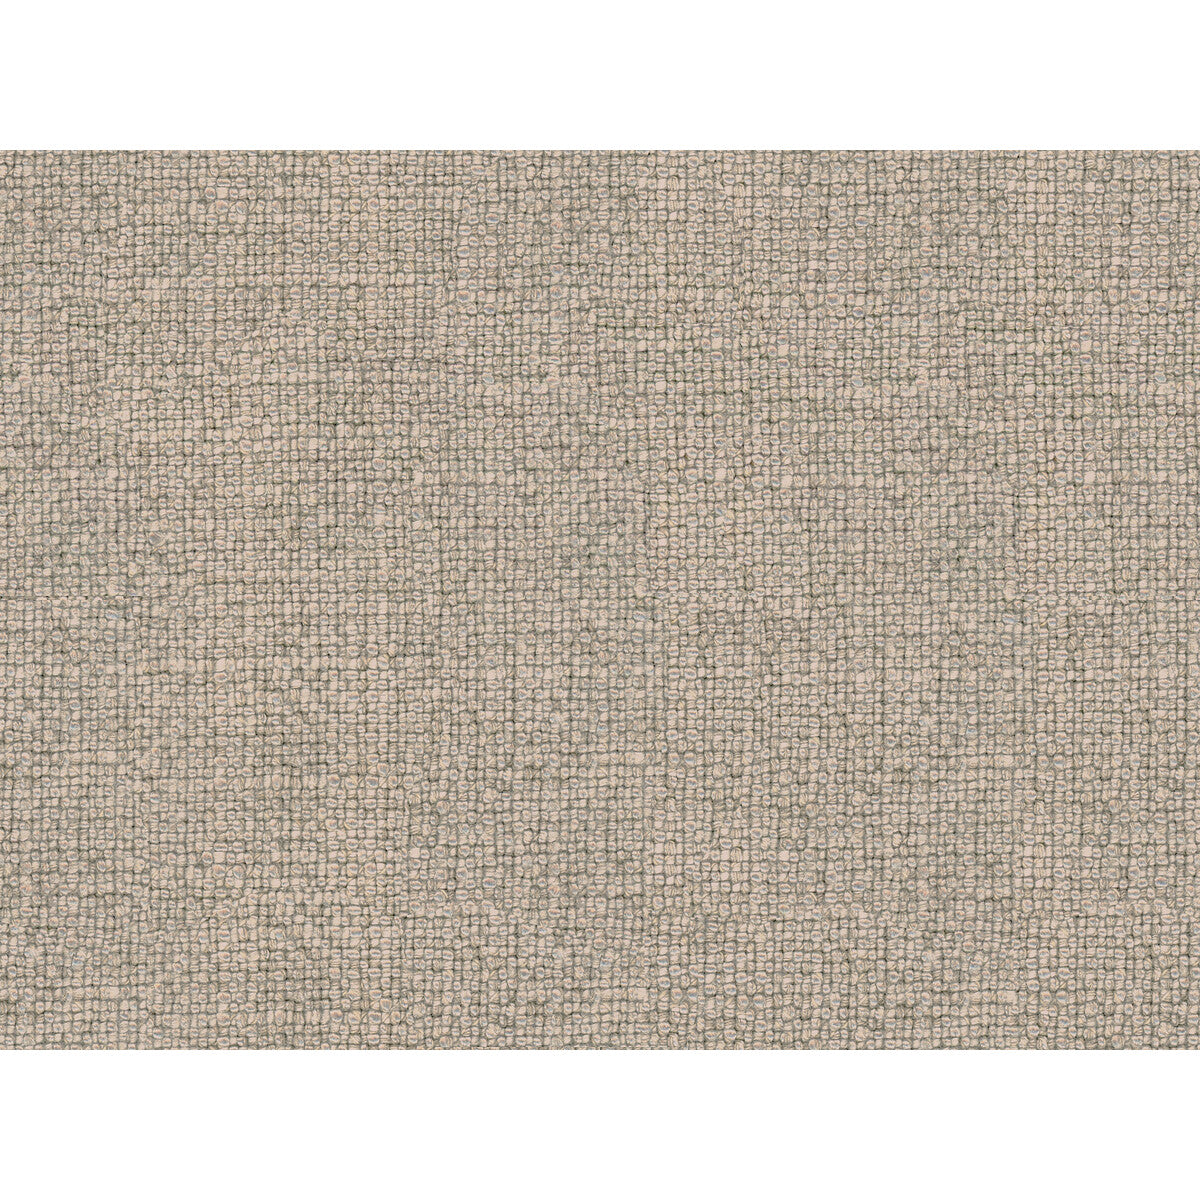 Shibumi Linen fabric in ecru color - pattern 34613.16.0 - by Kravet Couture in the Calvin Klein Home collection